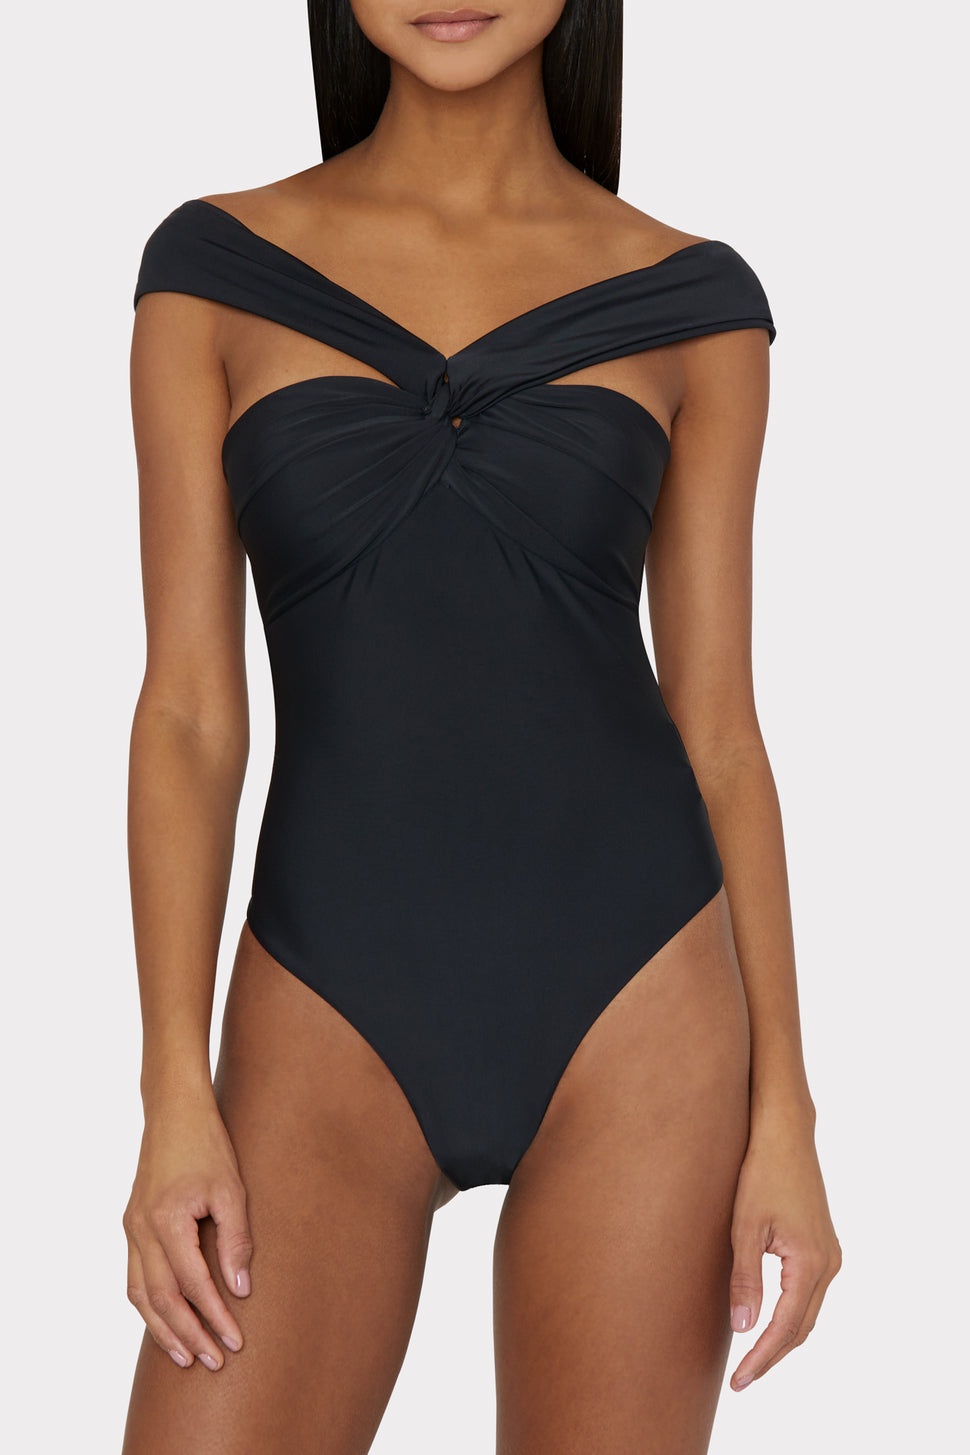 Betsy Bandeau One Piece In Black - MILLY in Black | MILLY